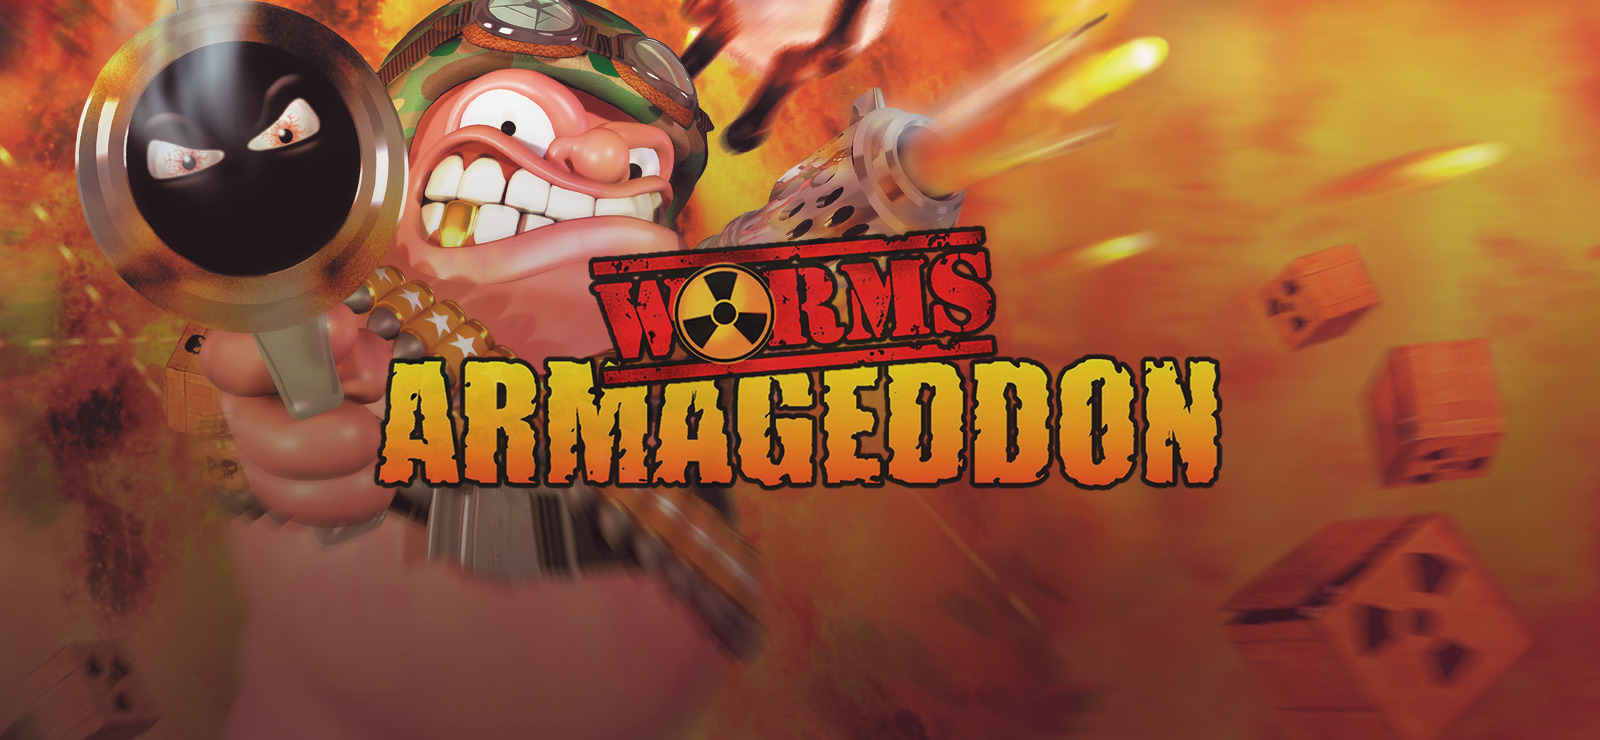 download armageddon ps3 for free